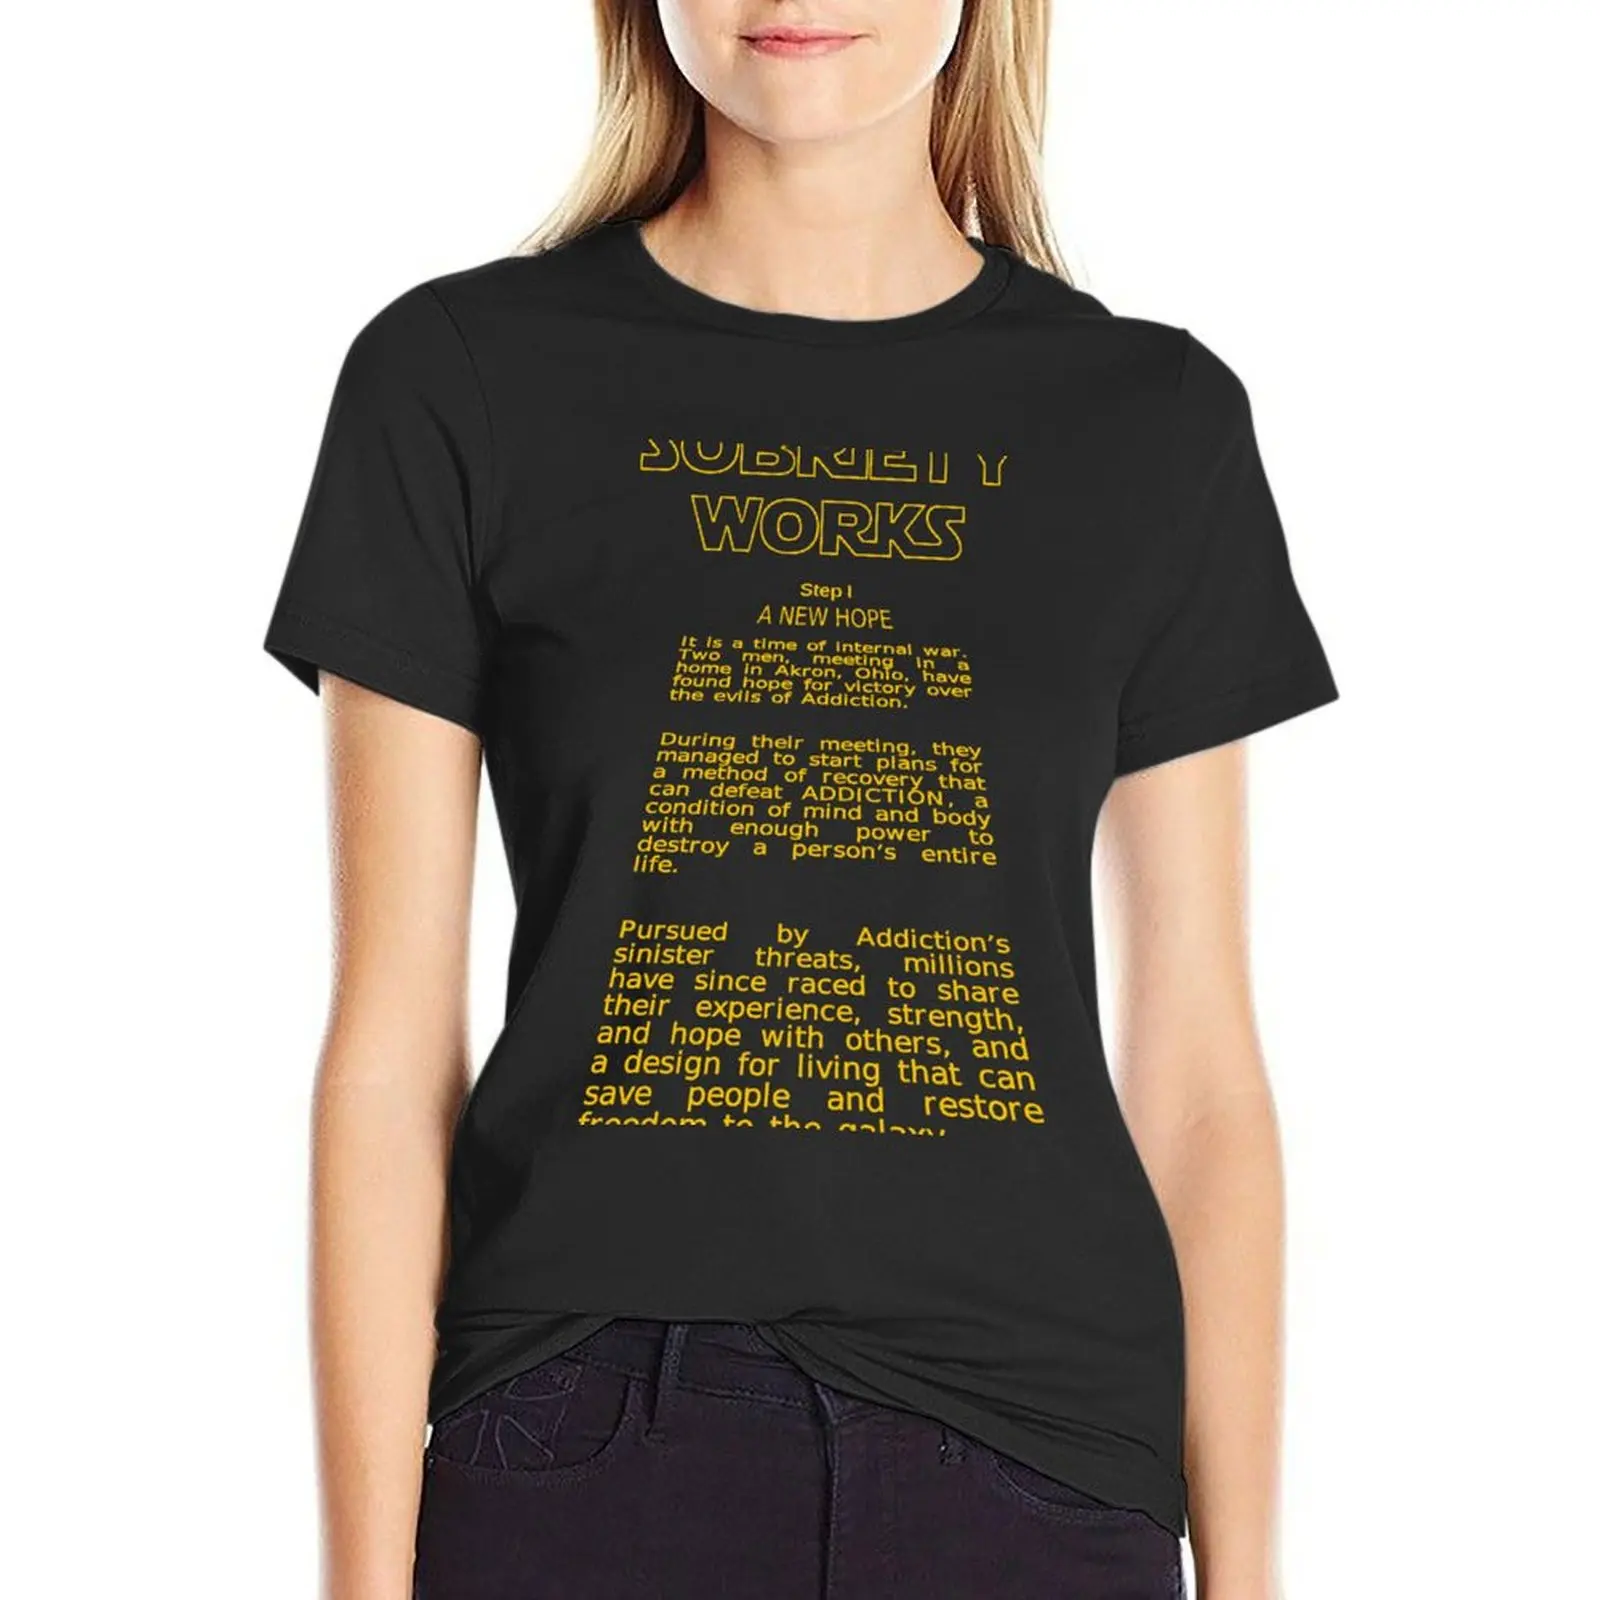 

Sobriety Works - Step I: A New Hope - Opening Crawl T-Shirt plus sizes heavyweights western t-shirt dress for Women